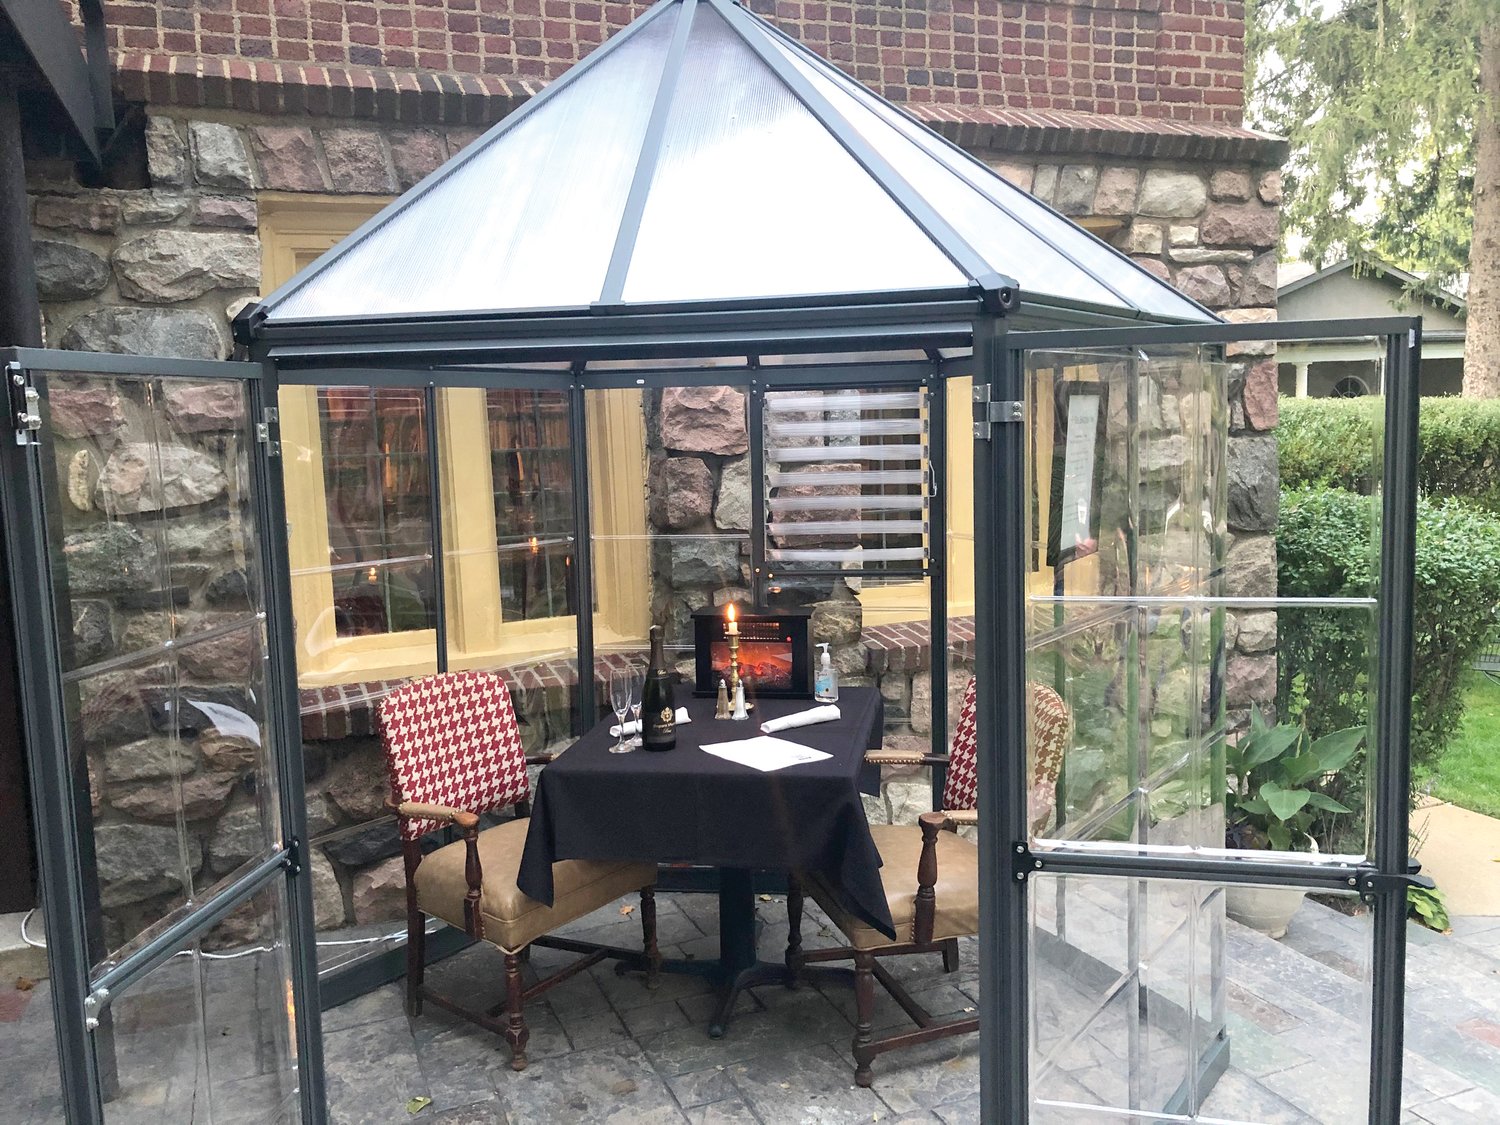 One of English Inn's heated greenhouse-style outdoor booths. They can accommodate parties of two to six.